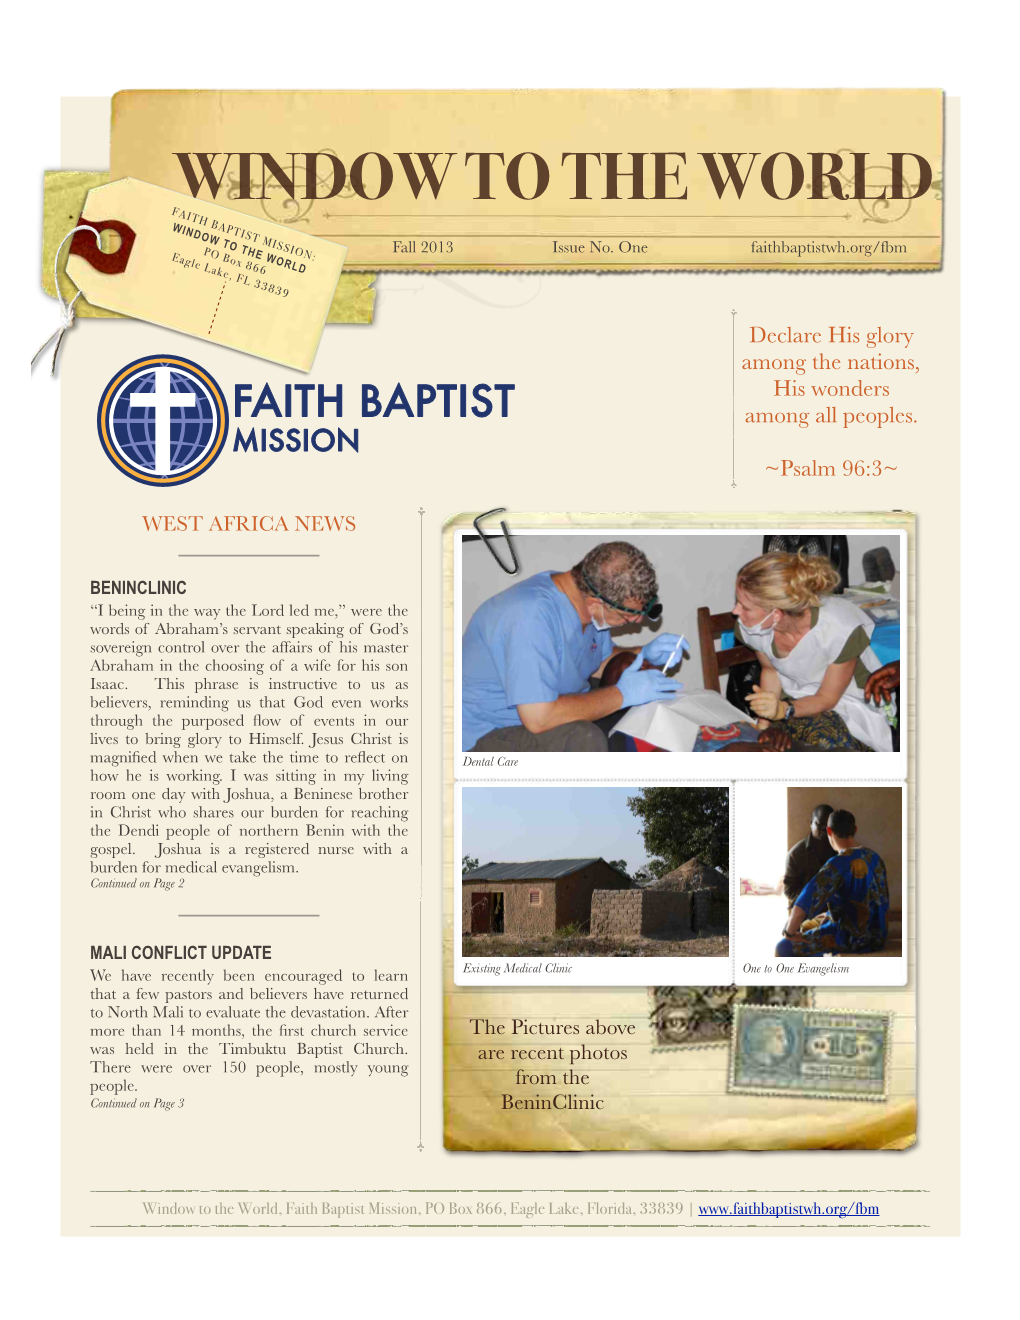 WINDOW to the WORLD FAITH BAPTIST MISSION WINDOW to the WORLD Fall 2013 Issue No